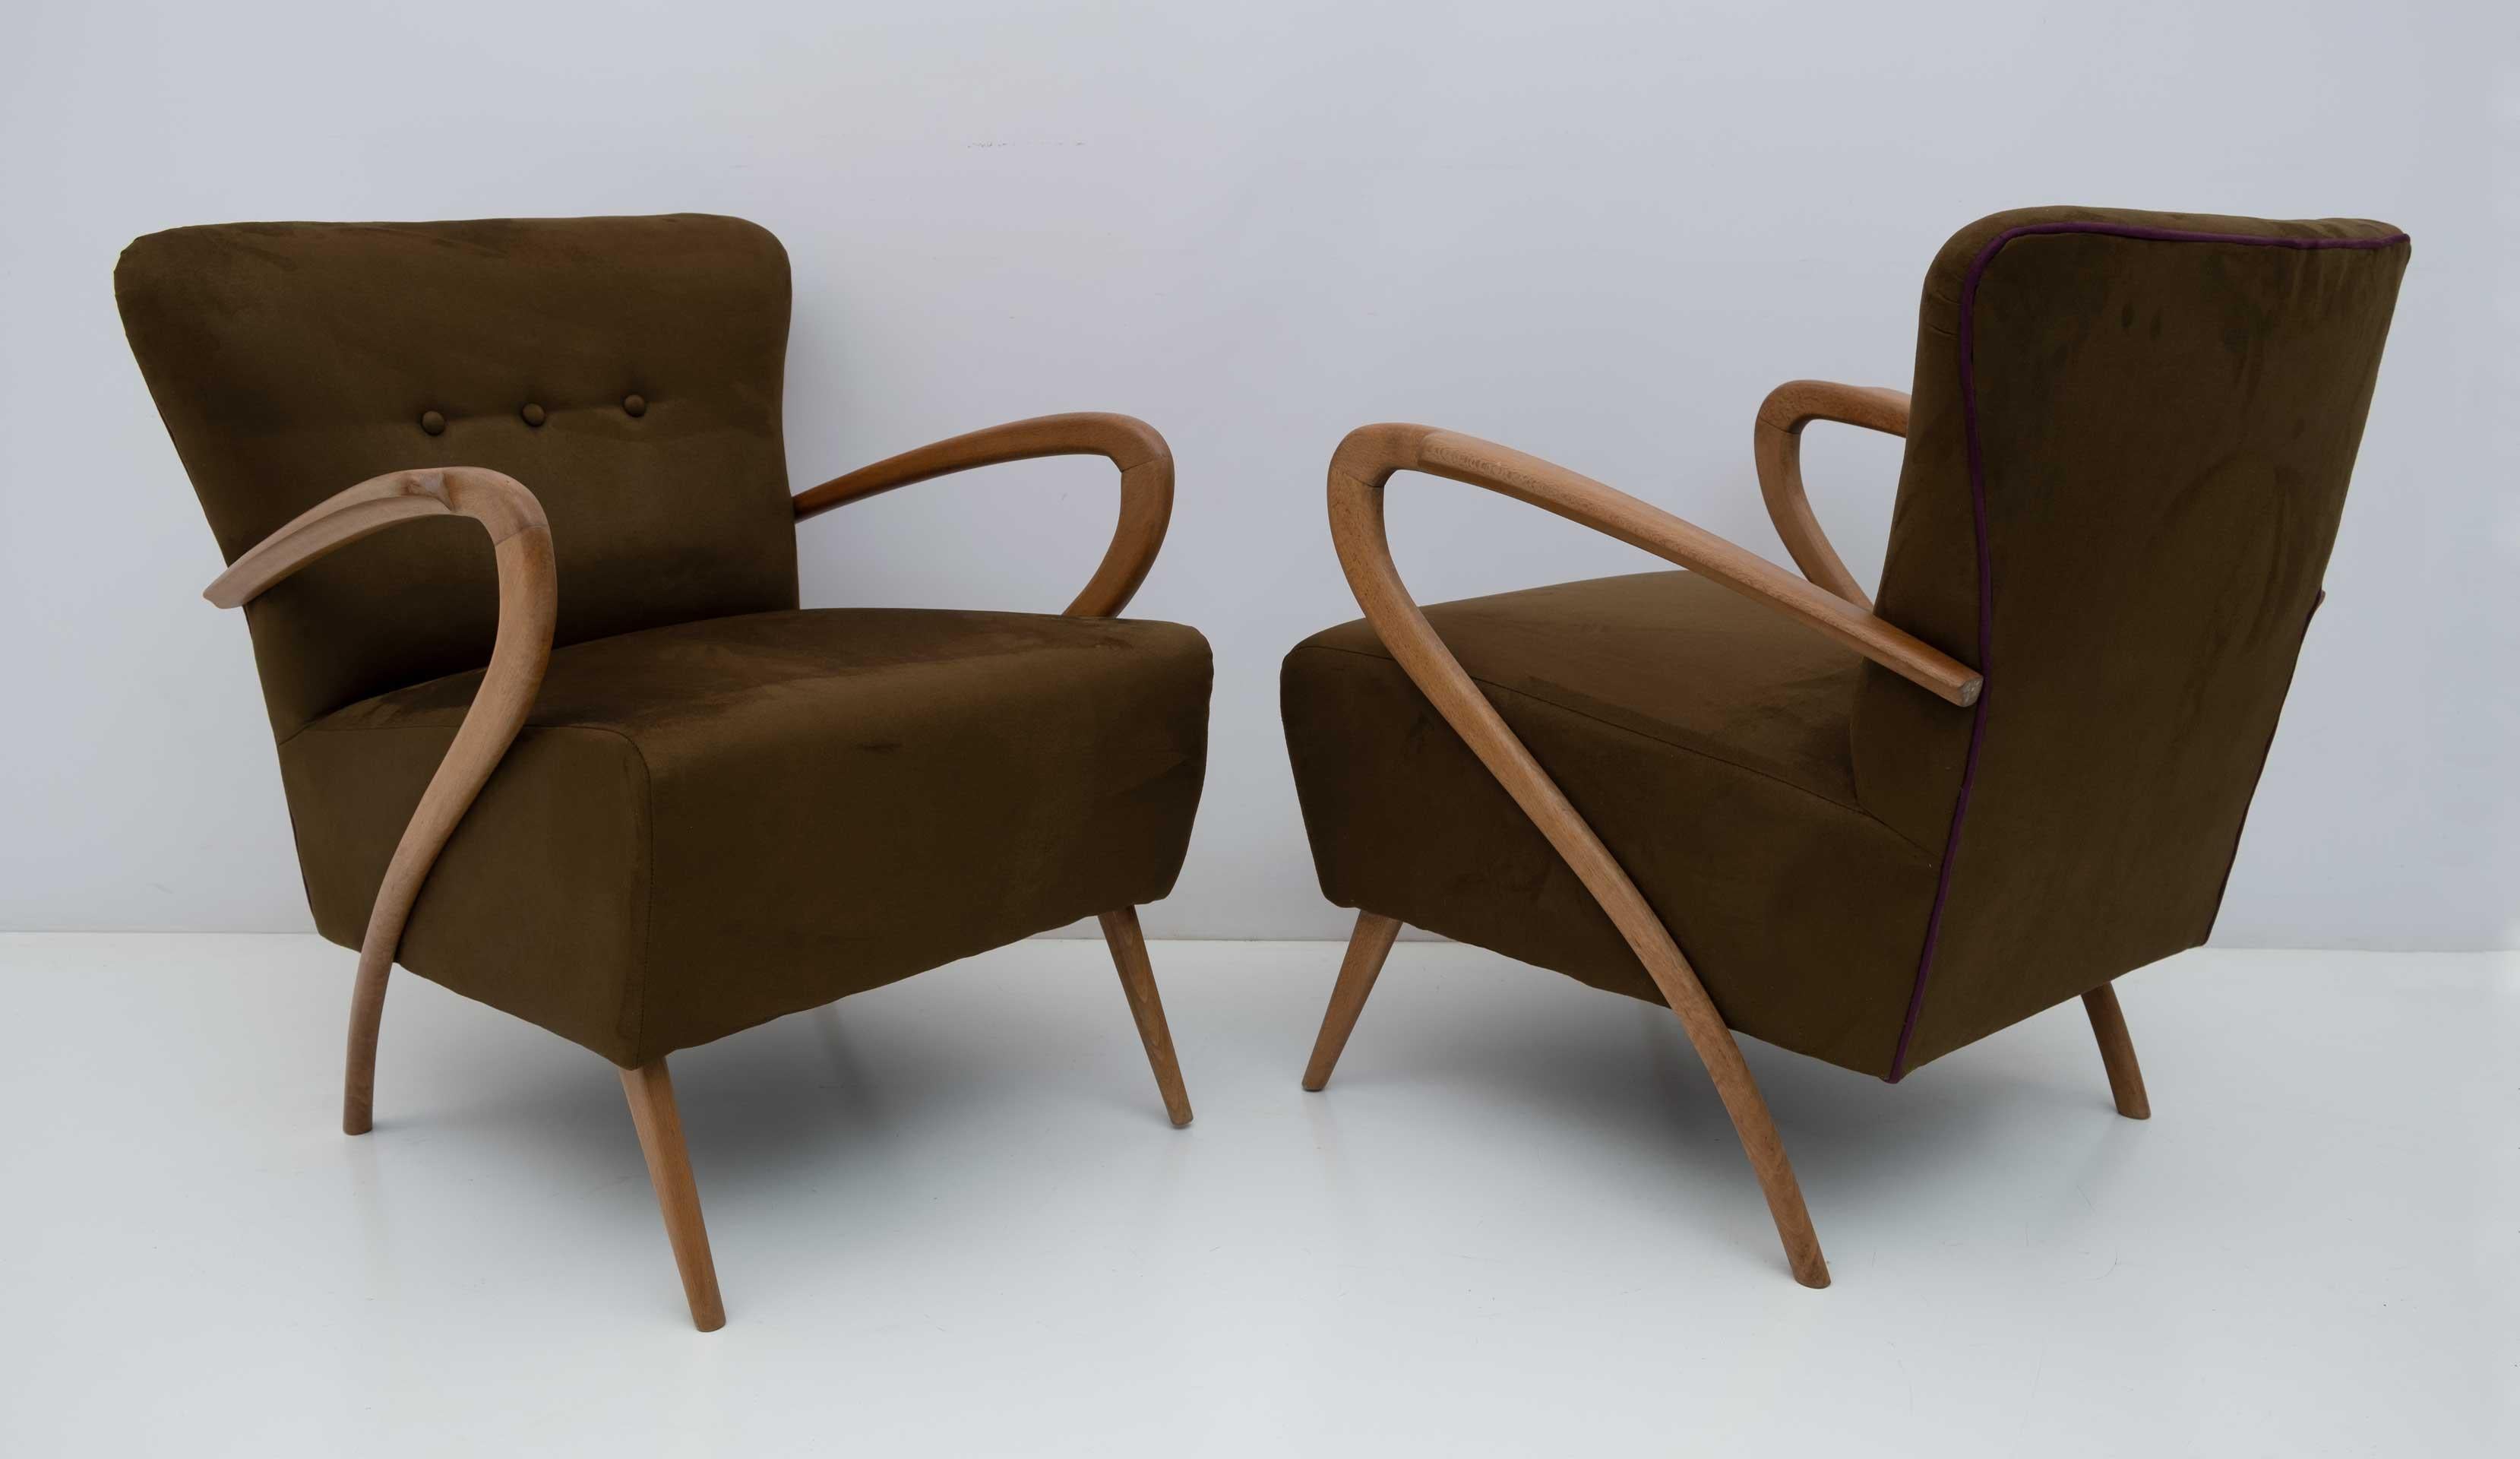 Pair of armchairs designed by Guglielmo Ulrich, reupholstered in brown shaved velvet with a fuchsia pink finish around the back, as shown in the photo, the armrests and feet are in curved beech, also restored and polished.

Guglielmo Ulrich. Born